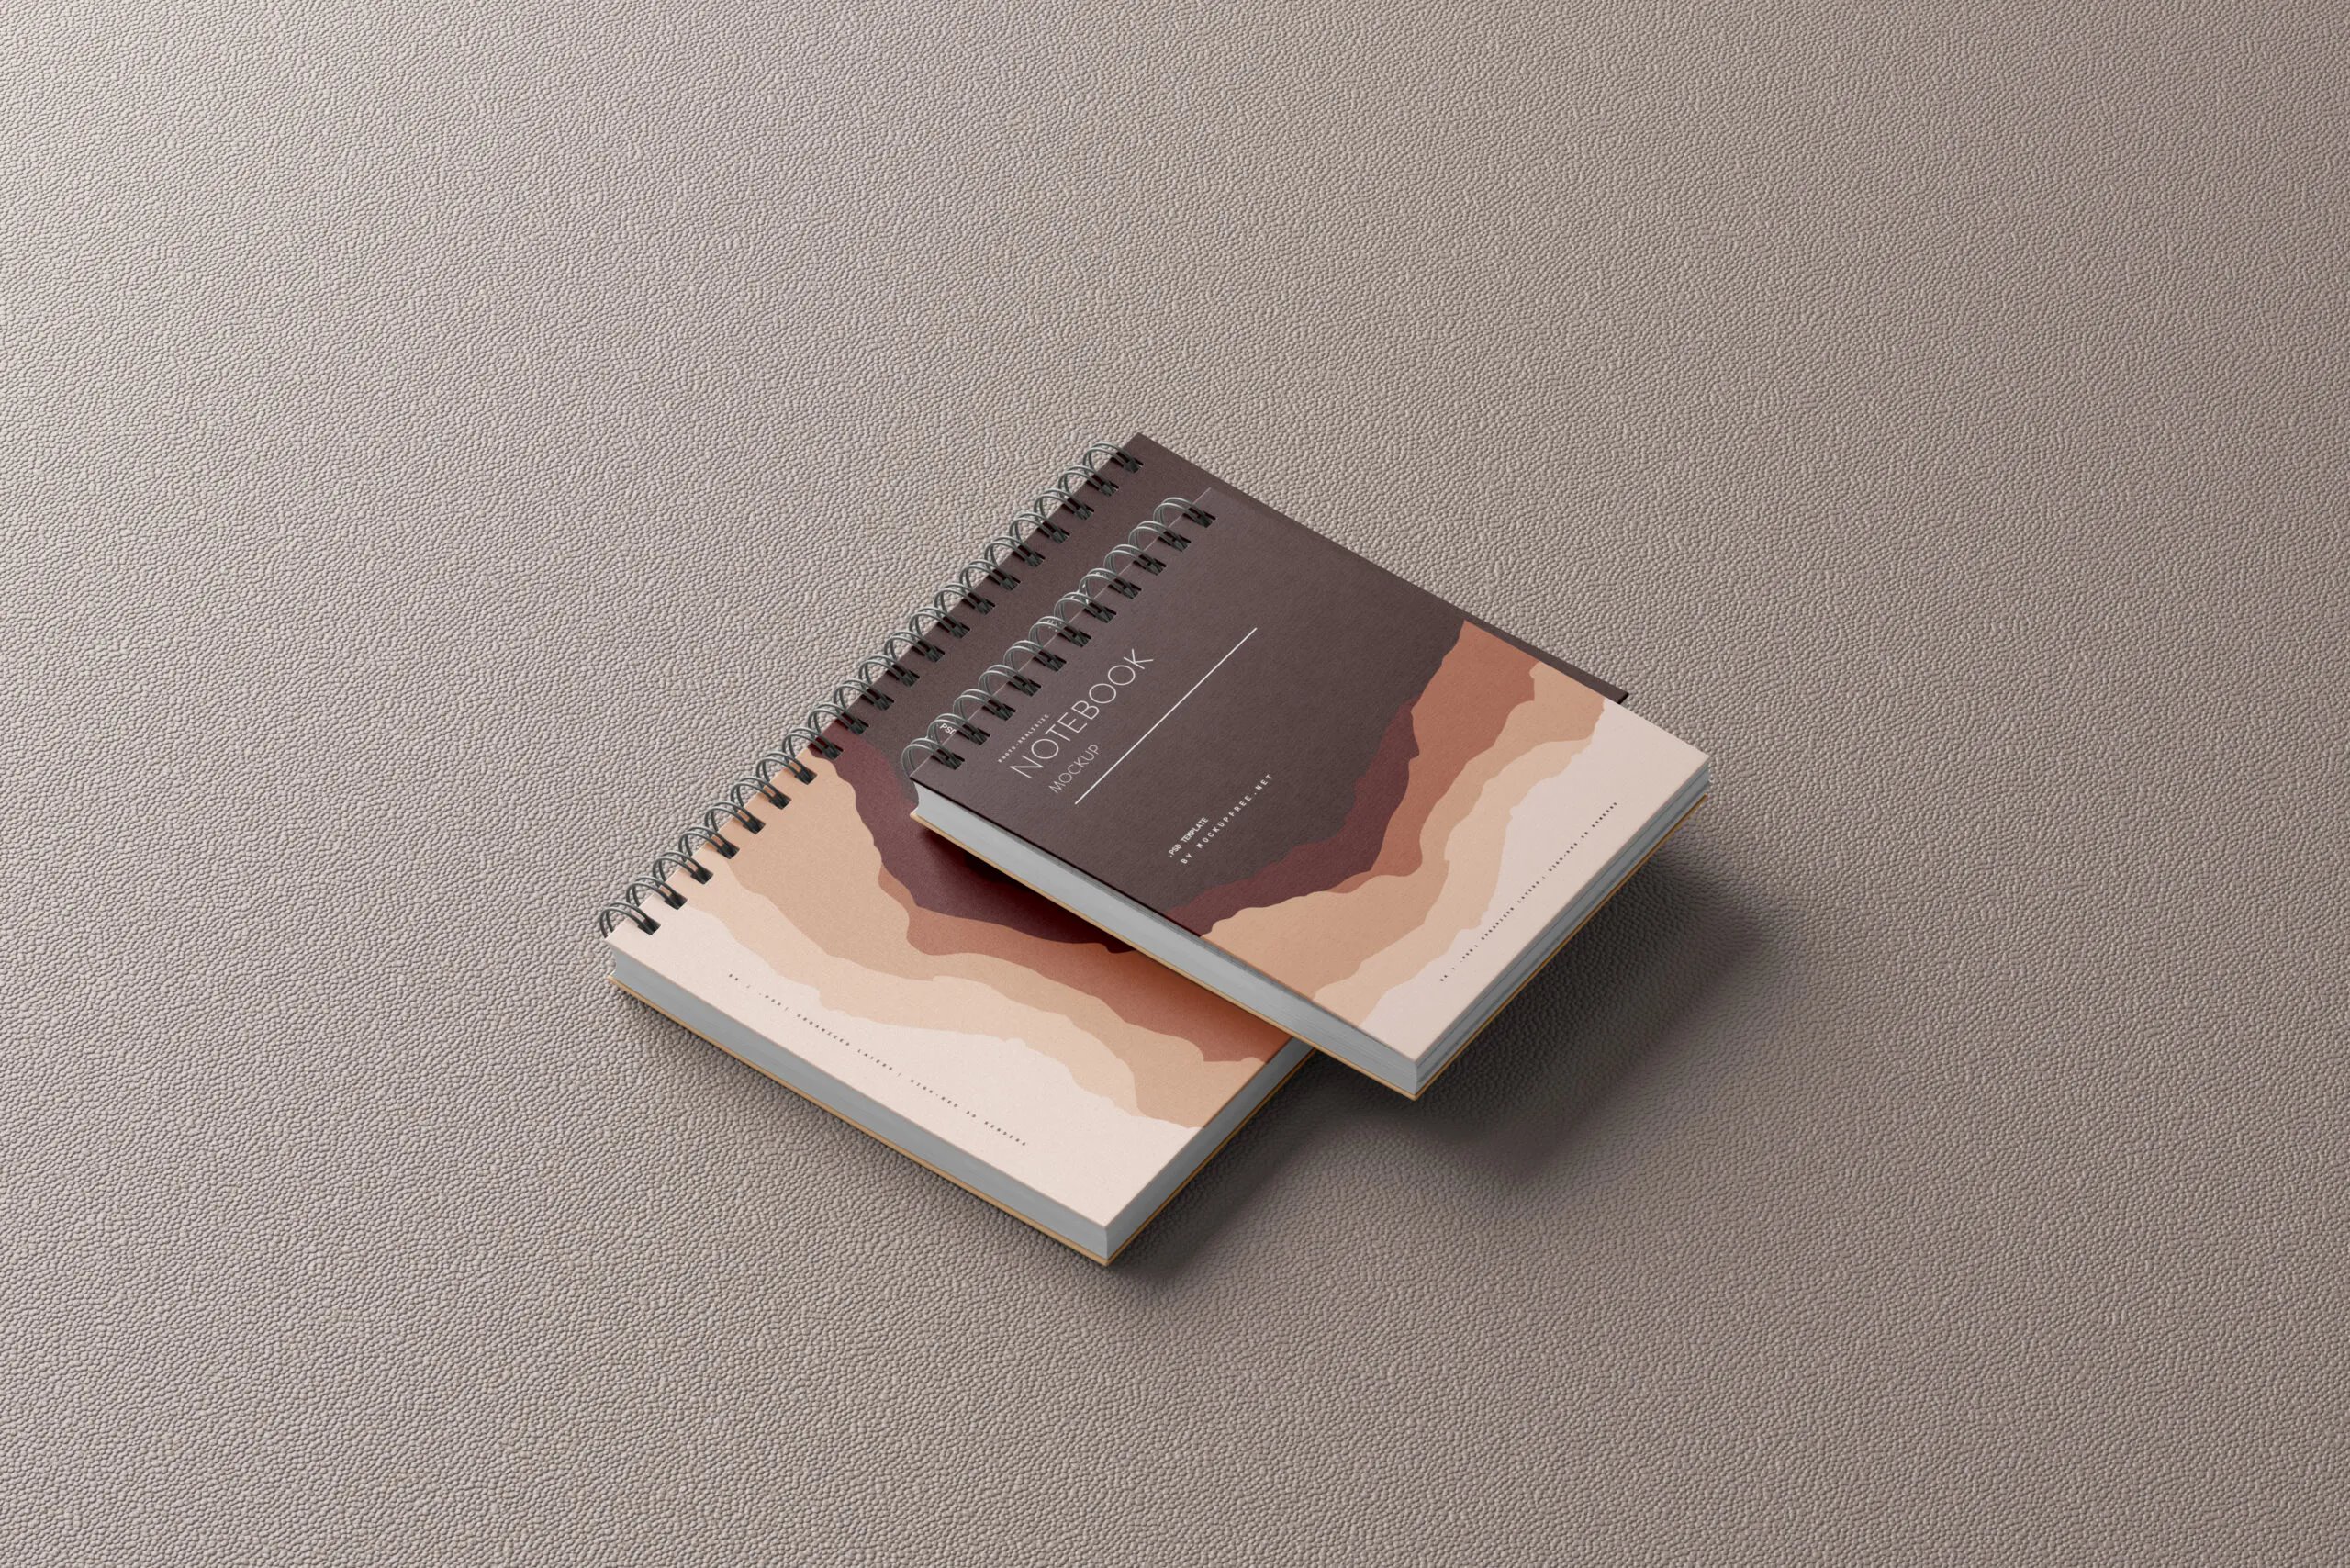 10 Mockups of 3 Sizes Notebook Branding in Varied Sights FREE PSD